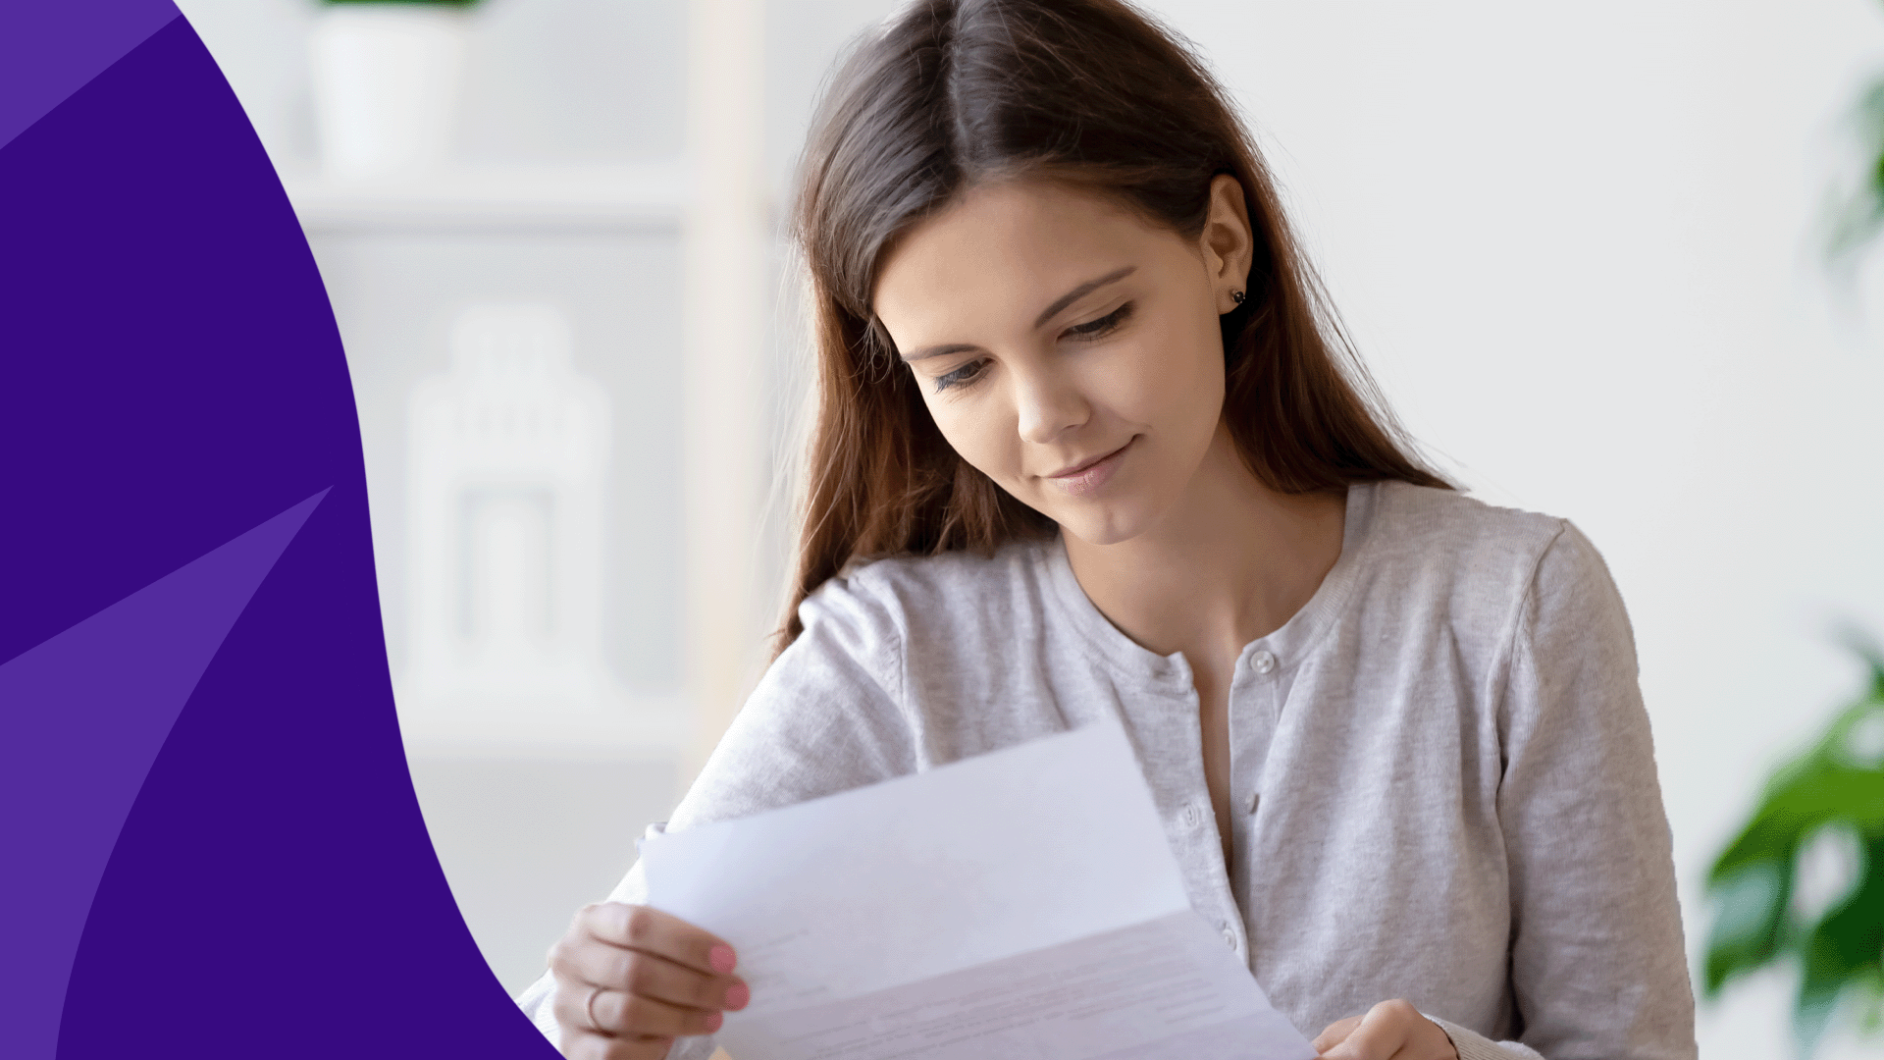 woman looking at a piece of paper - insurance appeal letter